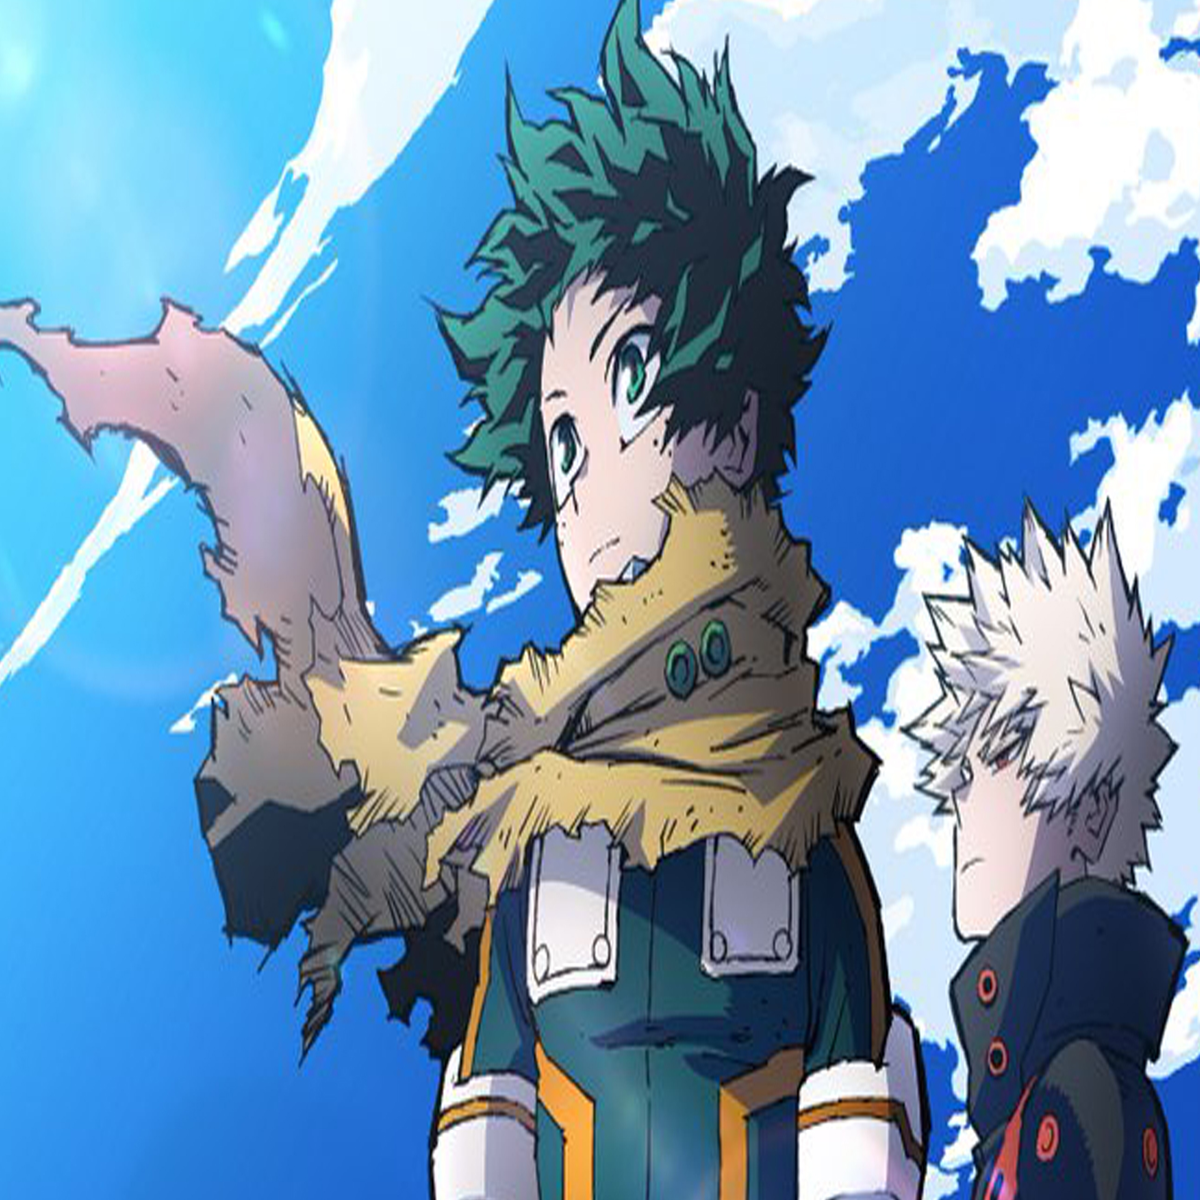 My Hero Academia Season 7 gets release date with official trailer